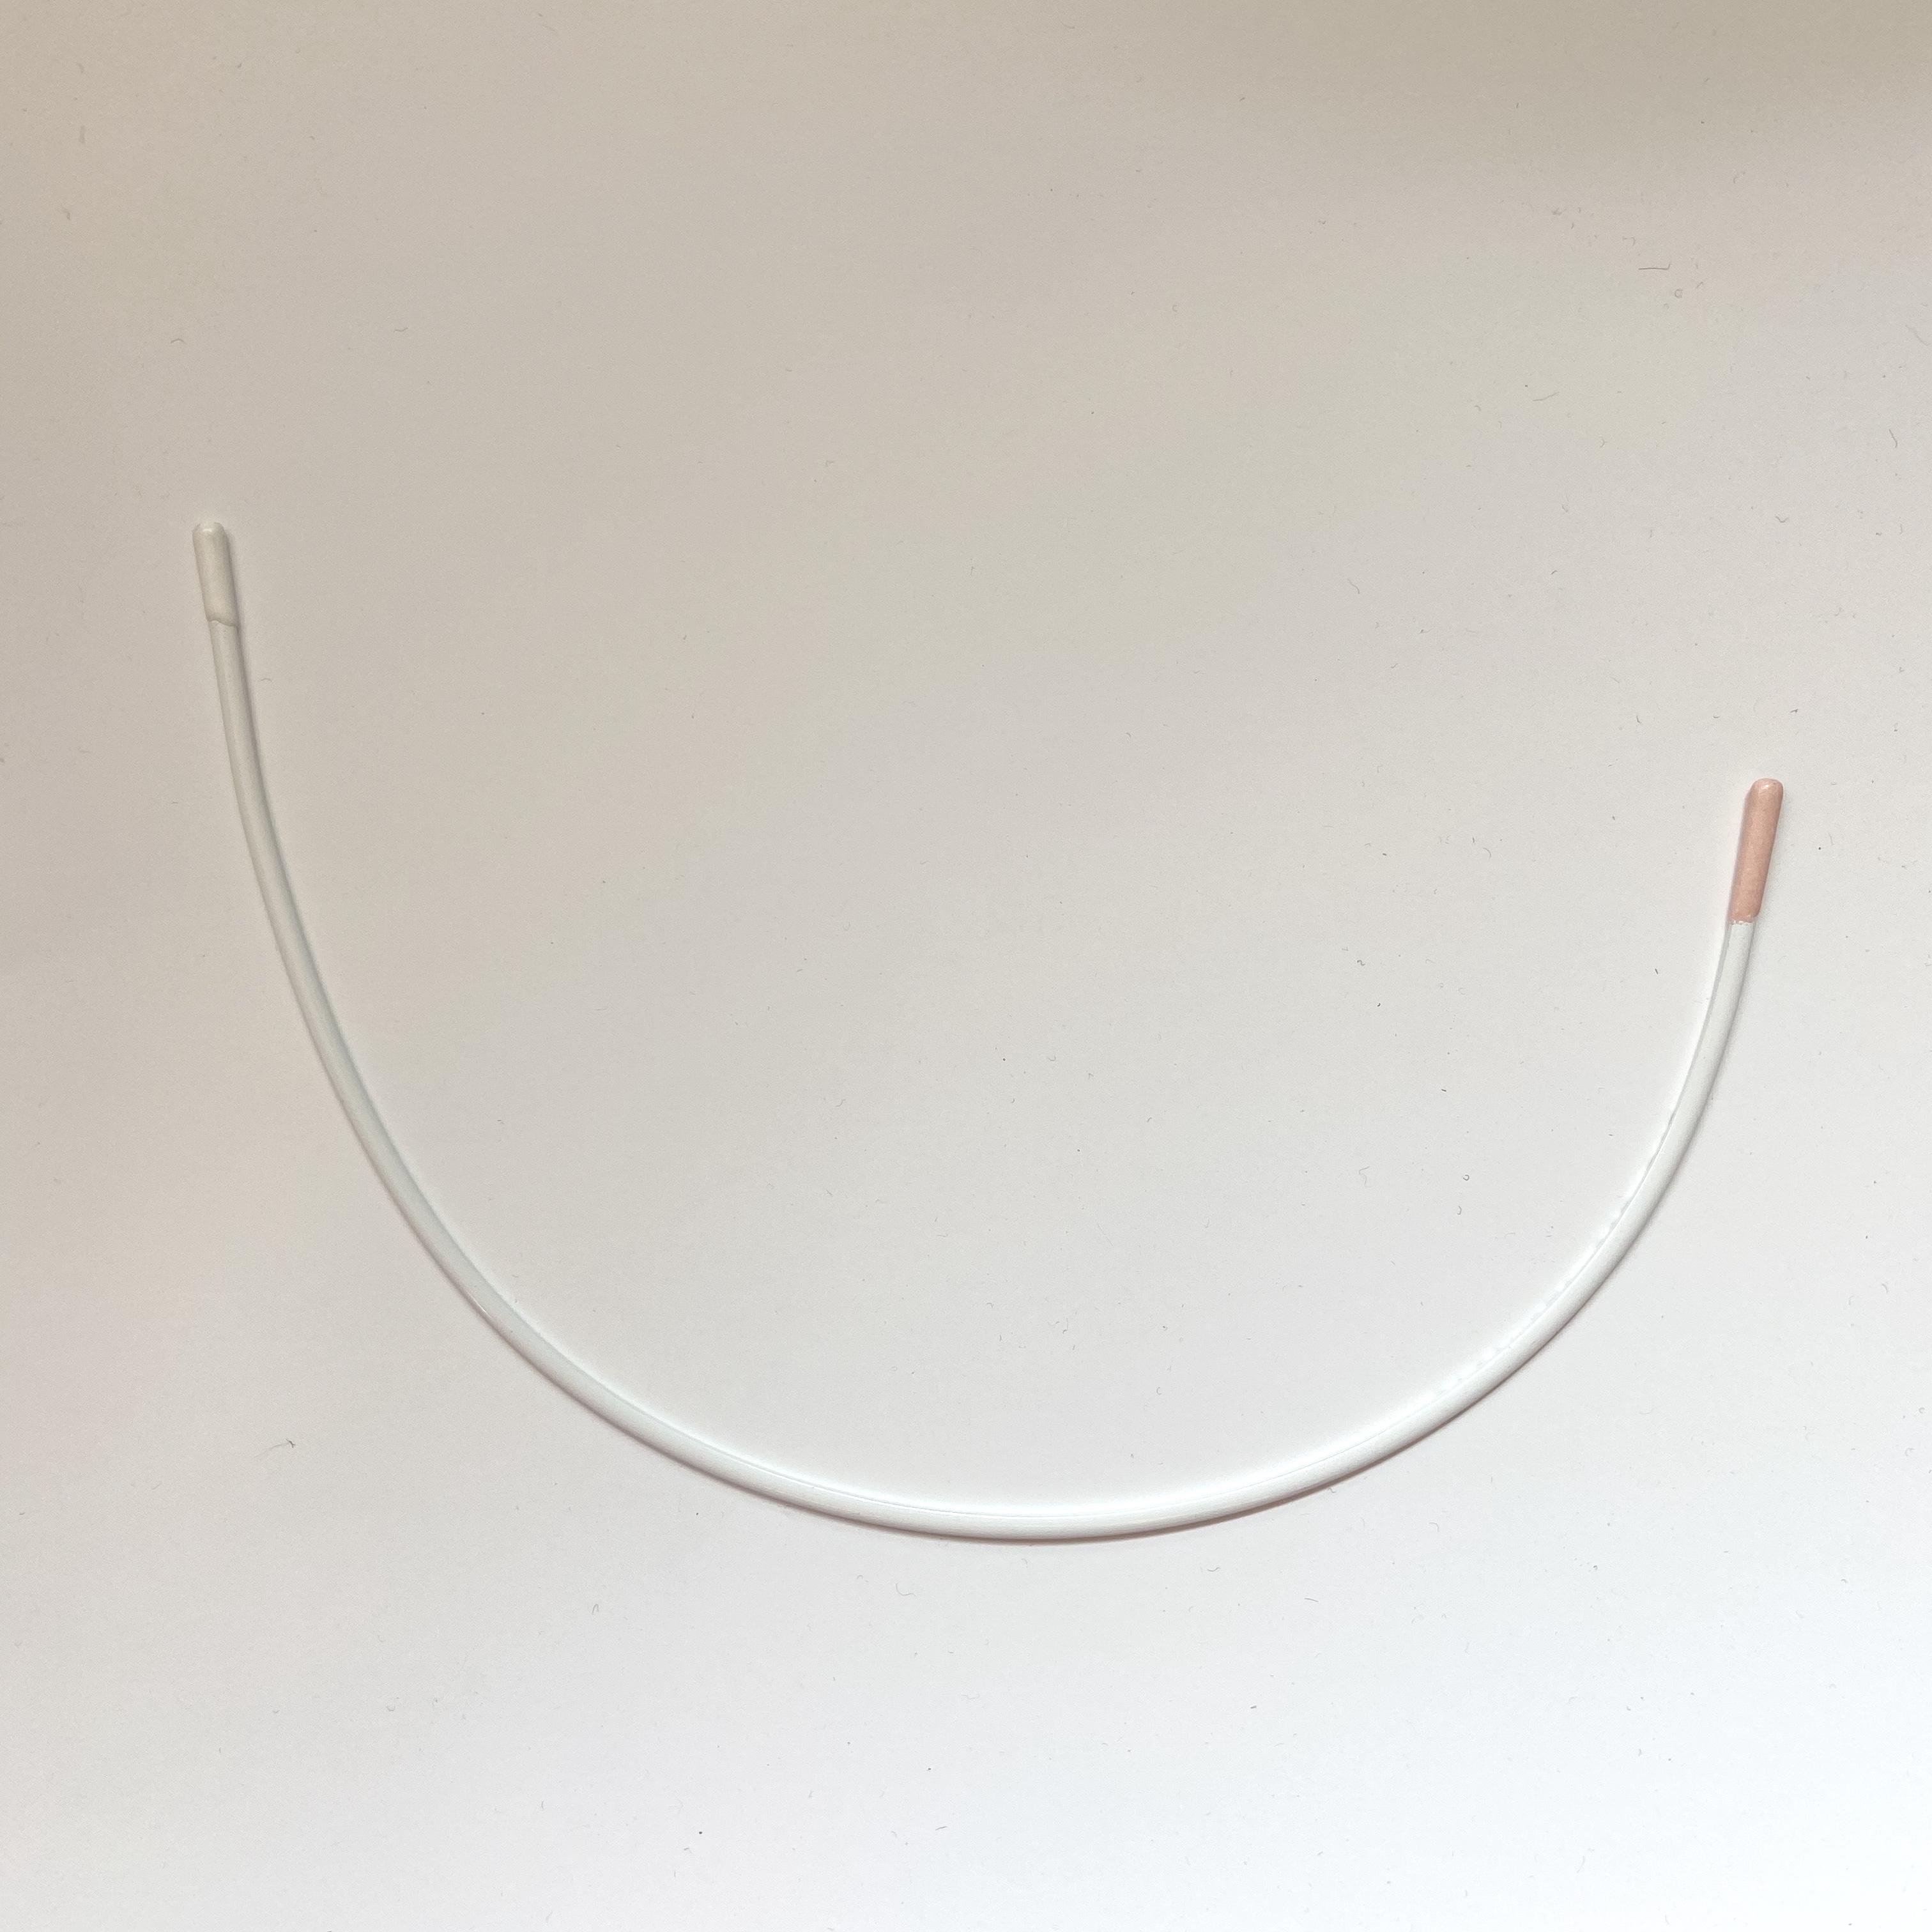 Bra Wire Underwire Replacement Boning Nylon Coated / Stainless Steel -   Australia